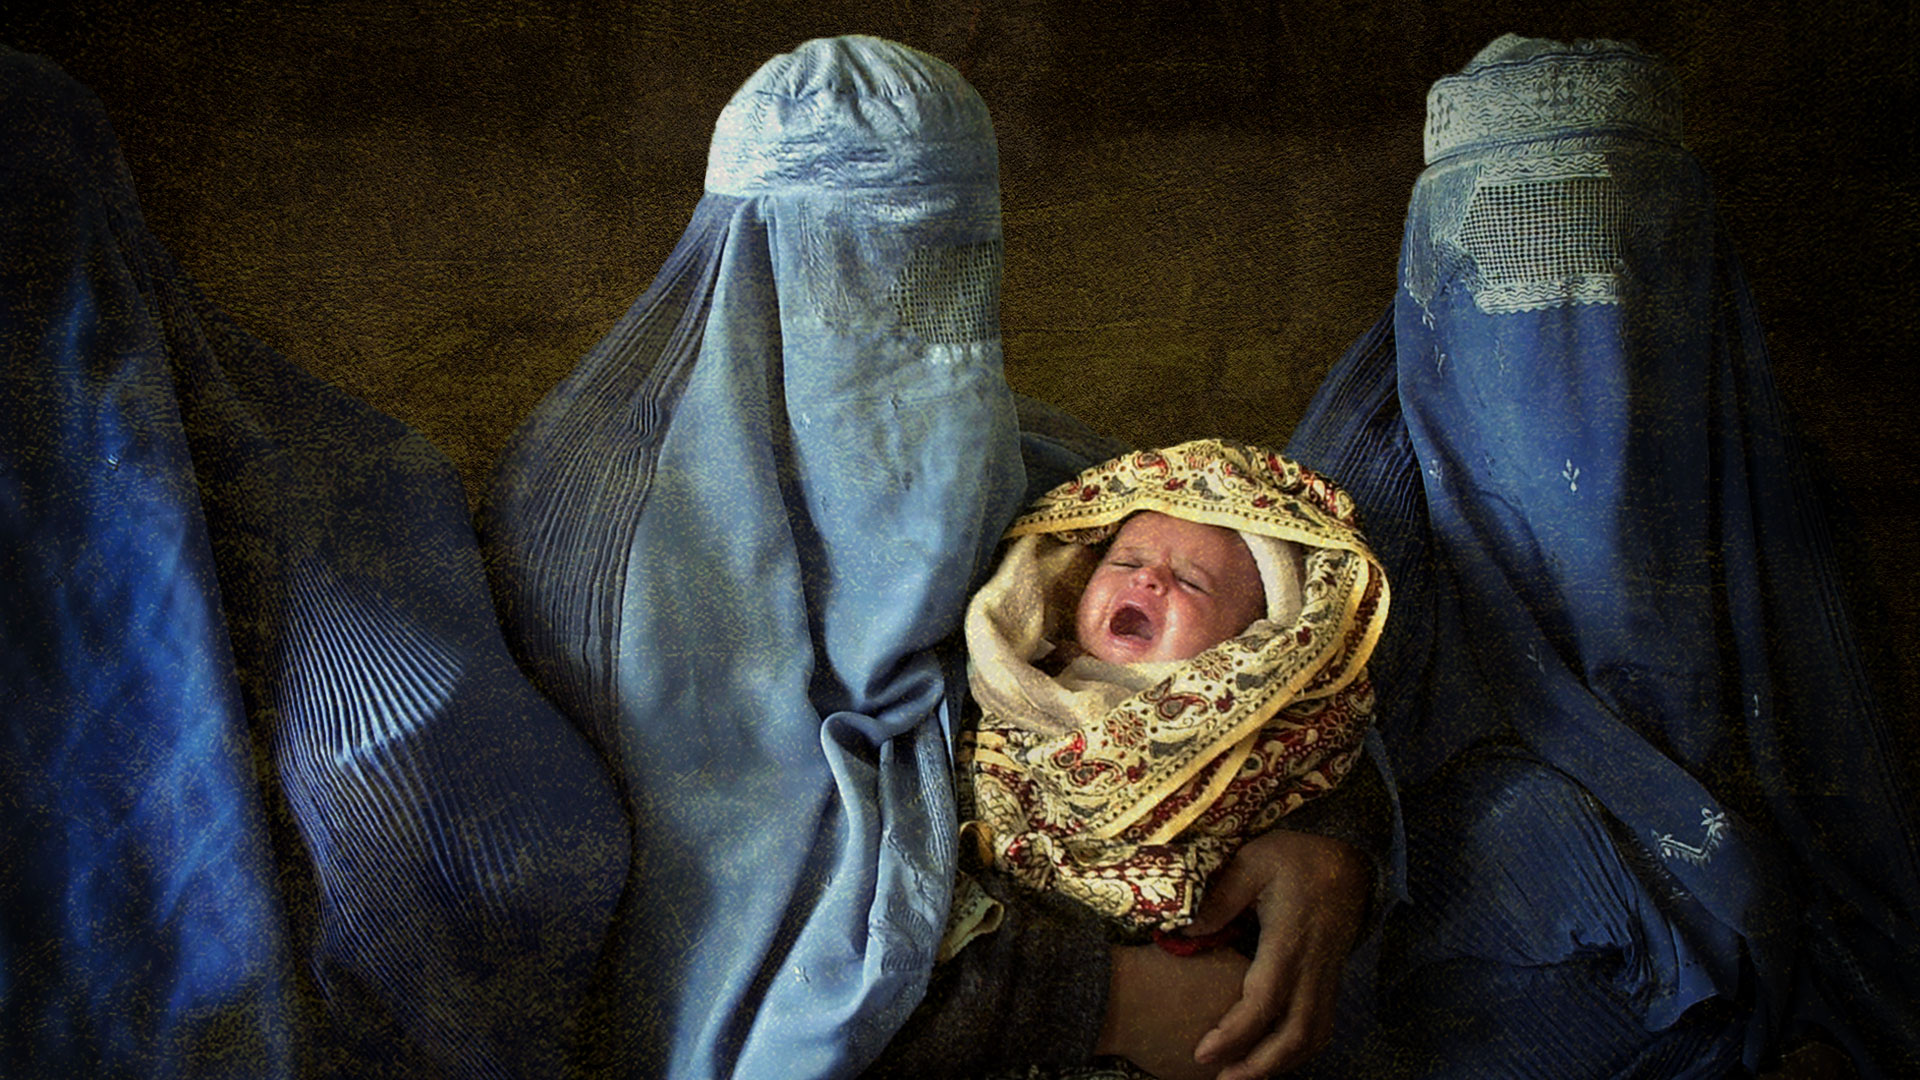 Afghan women in burkas, with baby, illustration